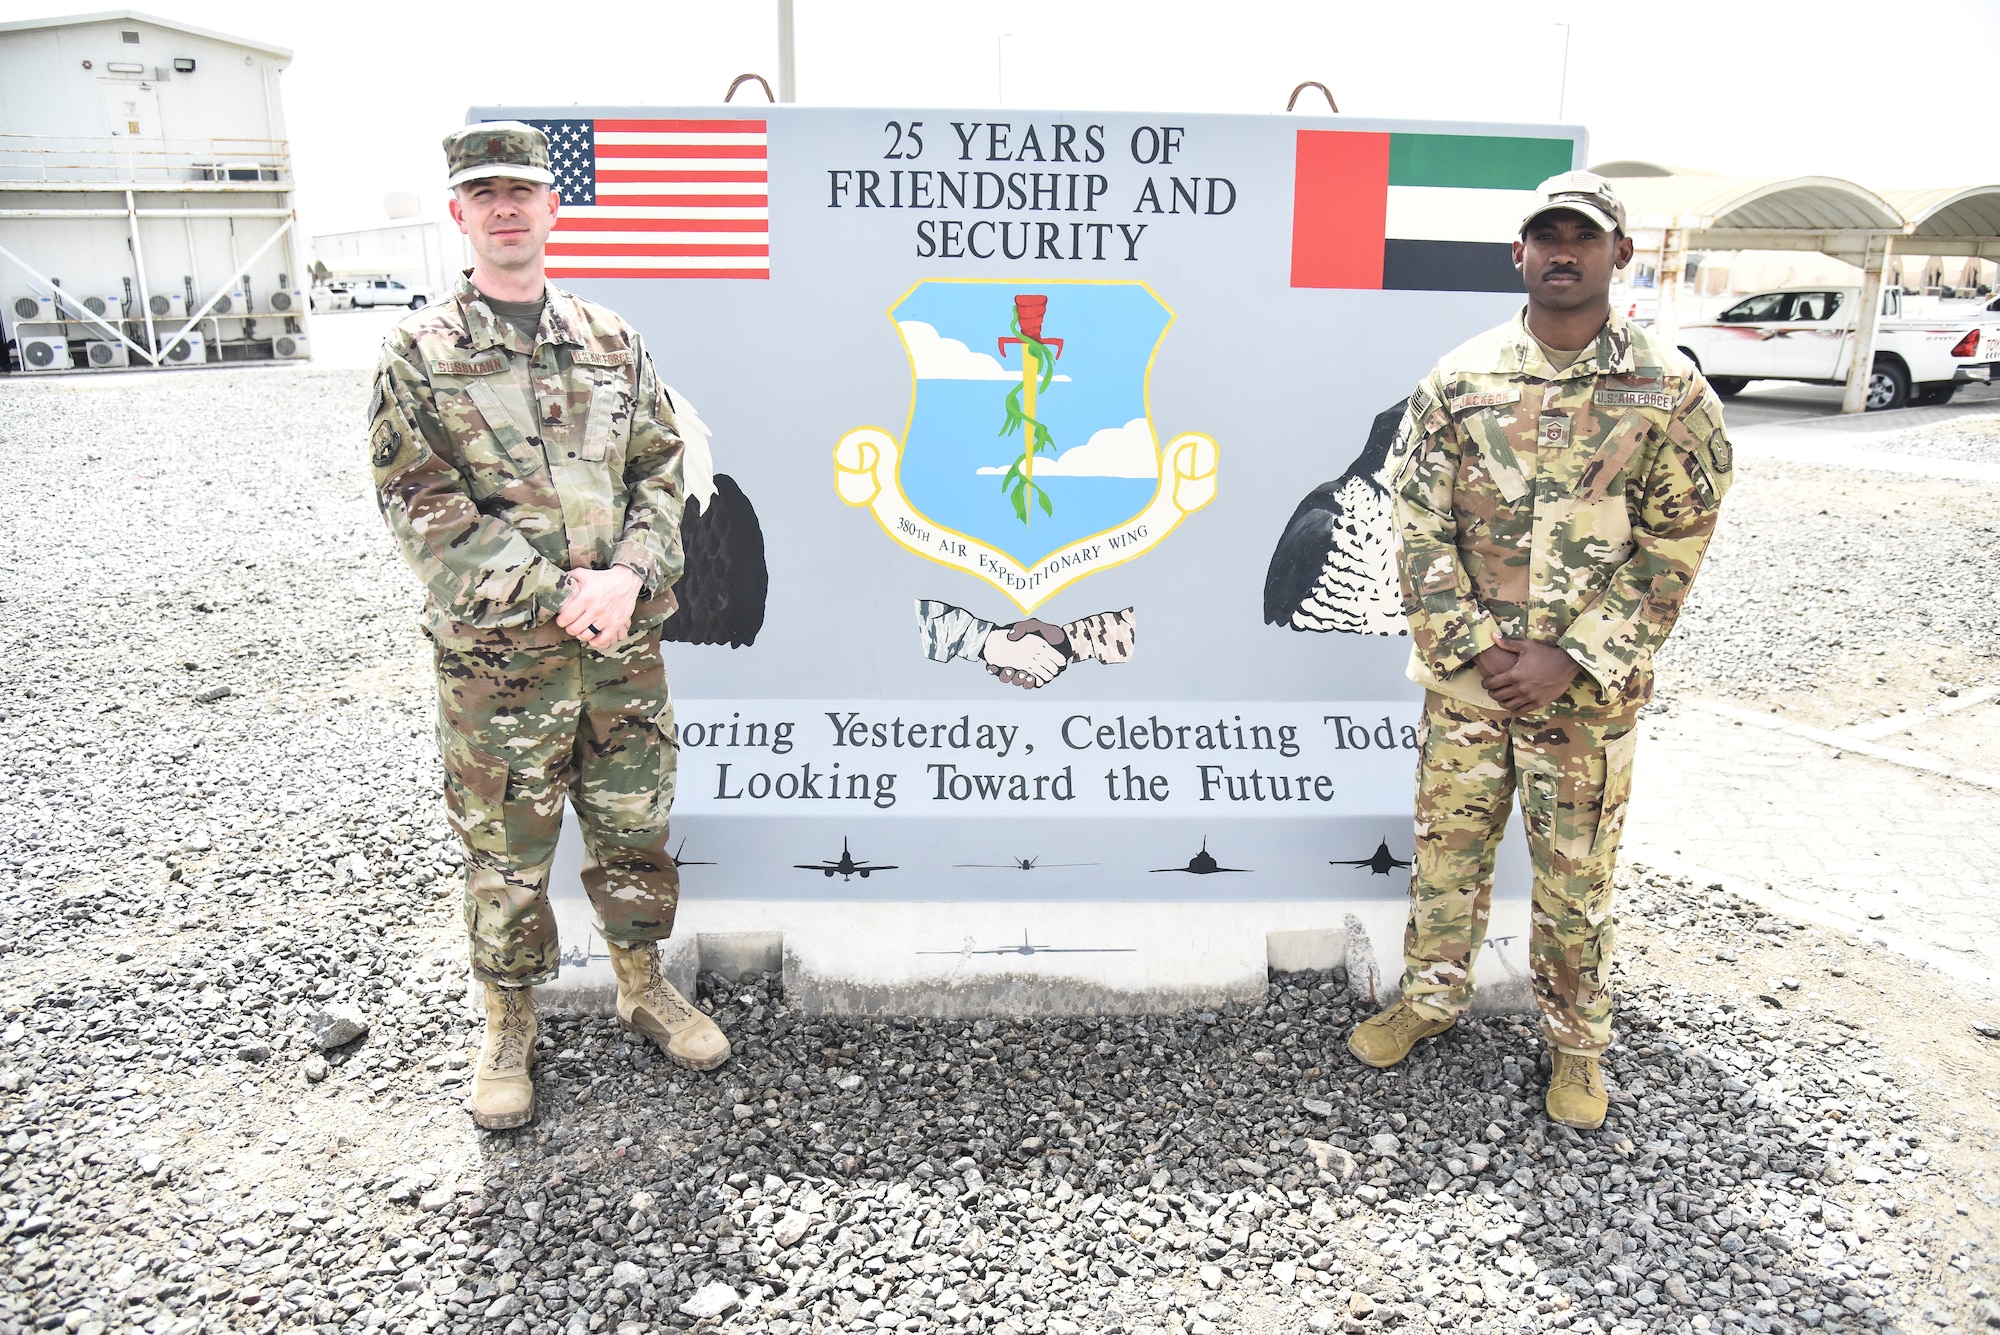 Maj. Vito Bussmann, 380th Air Expeditionary Wing chief of Plans and Programs, and Master Sgt. William Jackson, 380th AEW Plans and Programs superintendent, pose for a group photo at Al Dhafra Air Base, United Arab Emirates, Mar. 21, 2019. The 380th AEW plans and programs shop, also known as XP, manages 18 base plans that the wing maintains for various contingencies (Chemical, Biological, Radiological, Nuclear, and Explosive; mishap response; disease containment; etc.) and run the Operations Security, Mission Assurance and Signature Management programs. (U.S. Air Force photo by Senior Airman Mya M. Crosby)